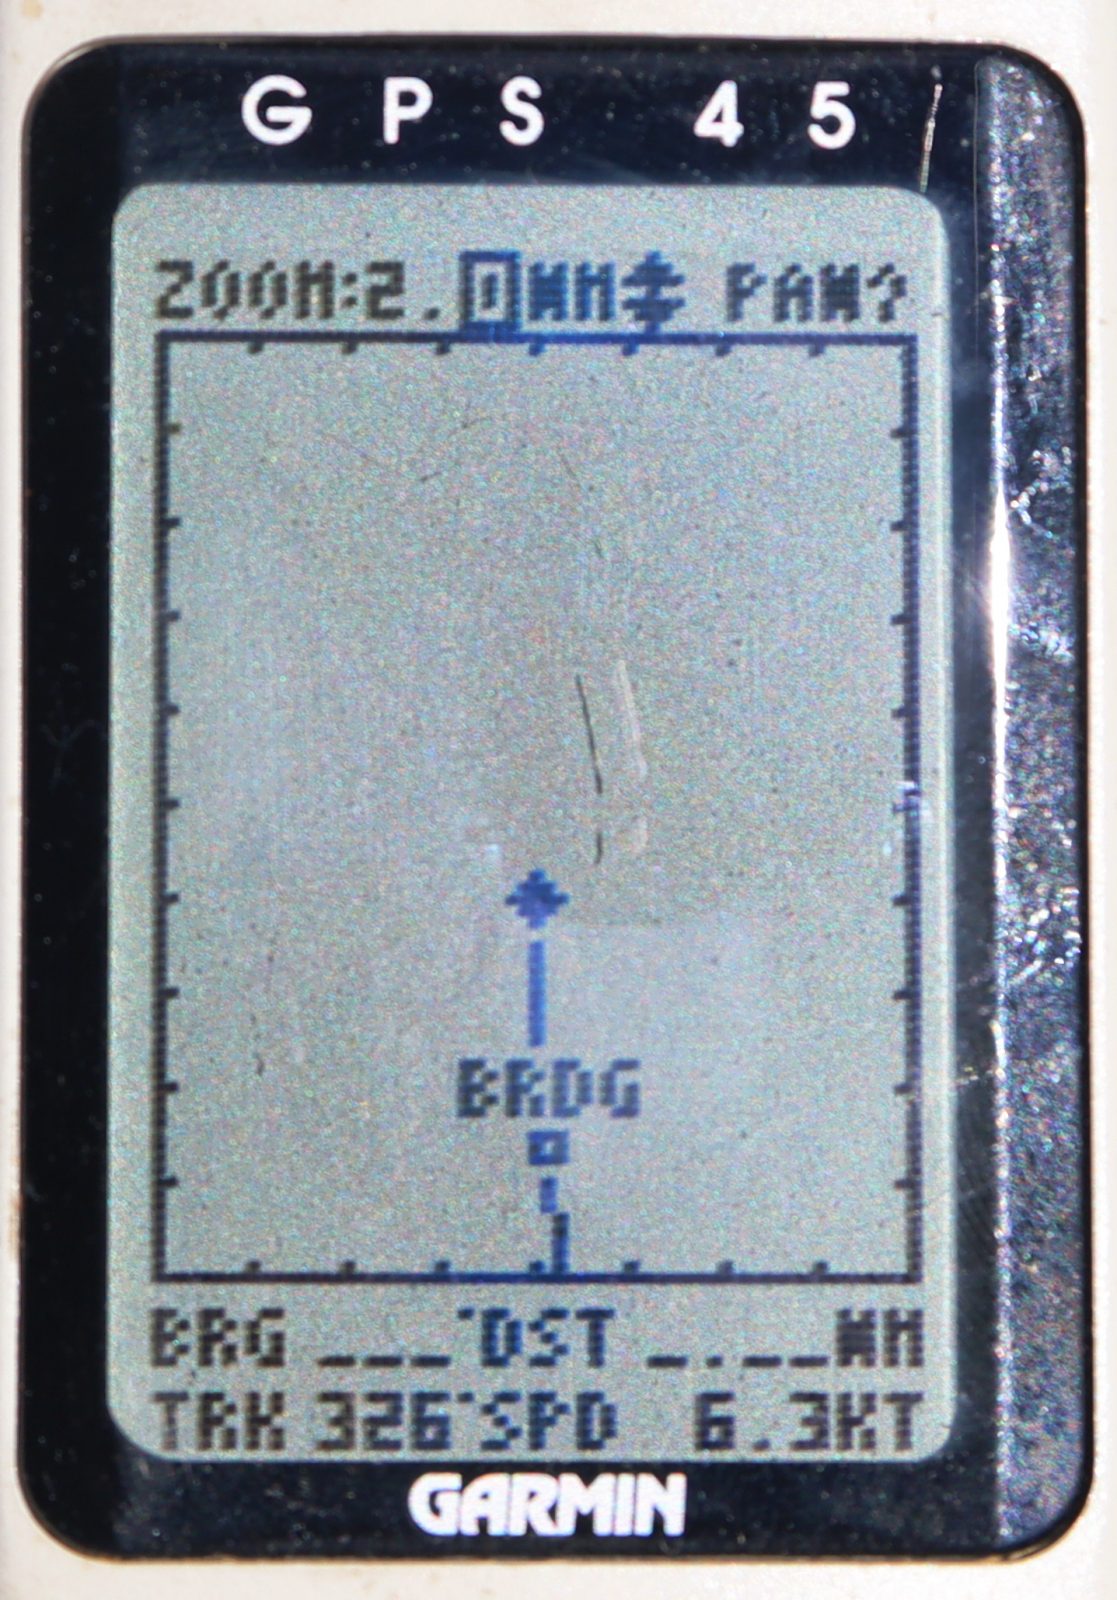 My Garmin GPS 45 was amazing in 1994, and it still works (mostly